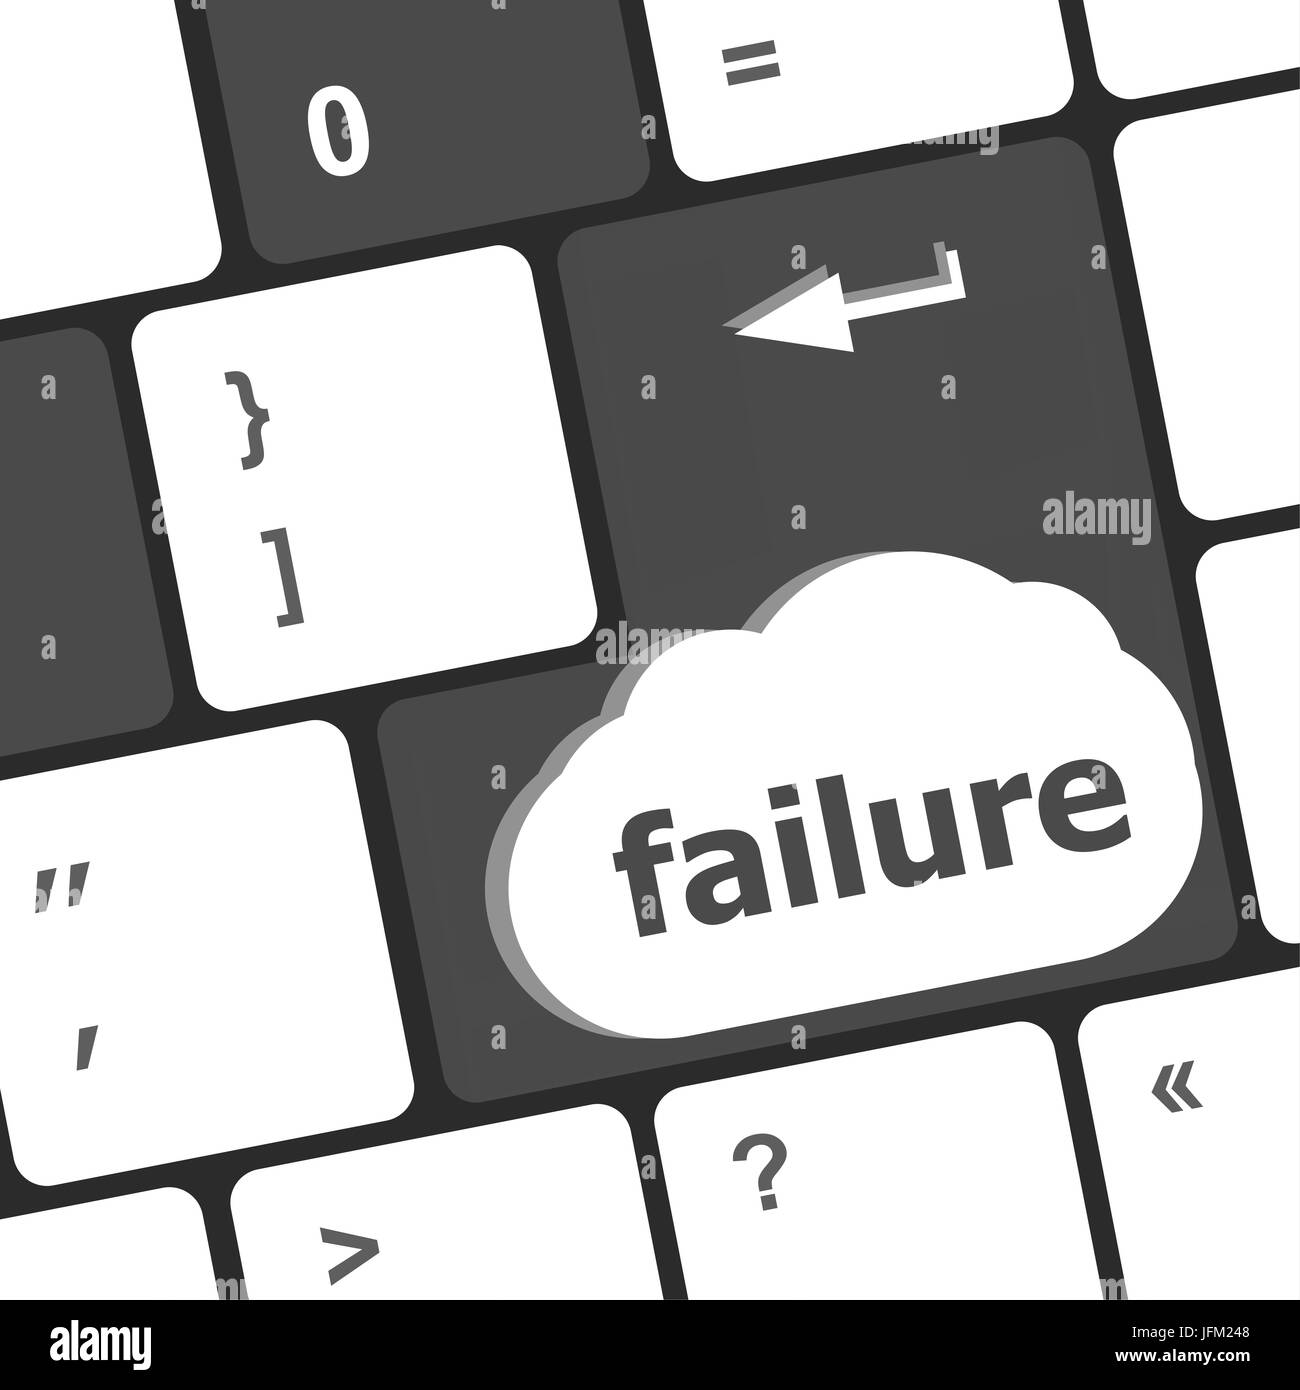 failure concept with word on keyboard key Stock Photo